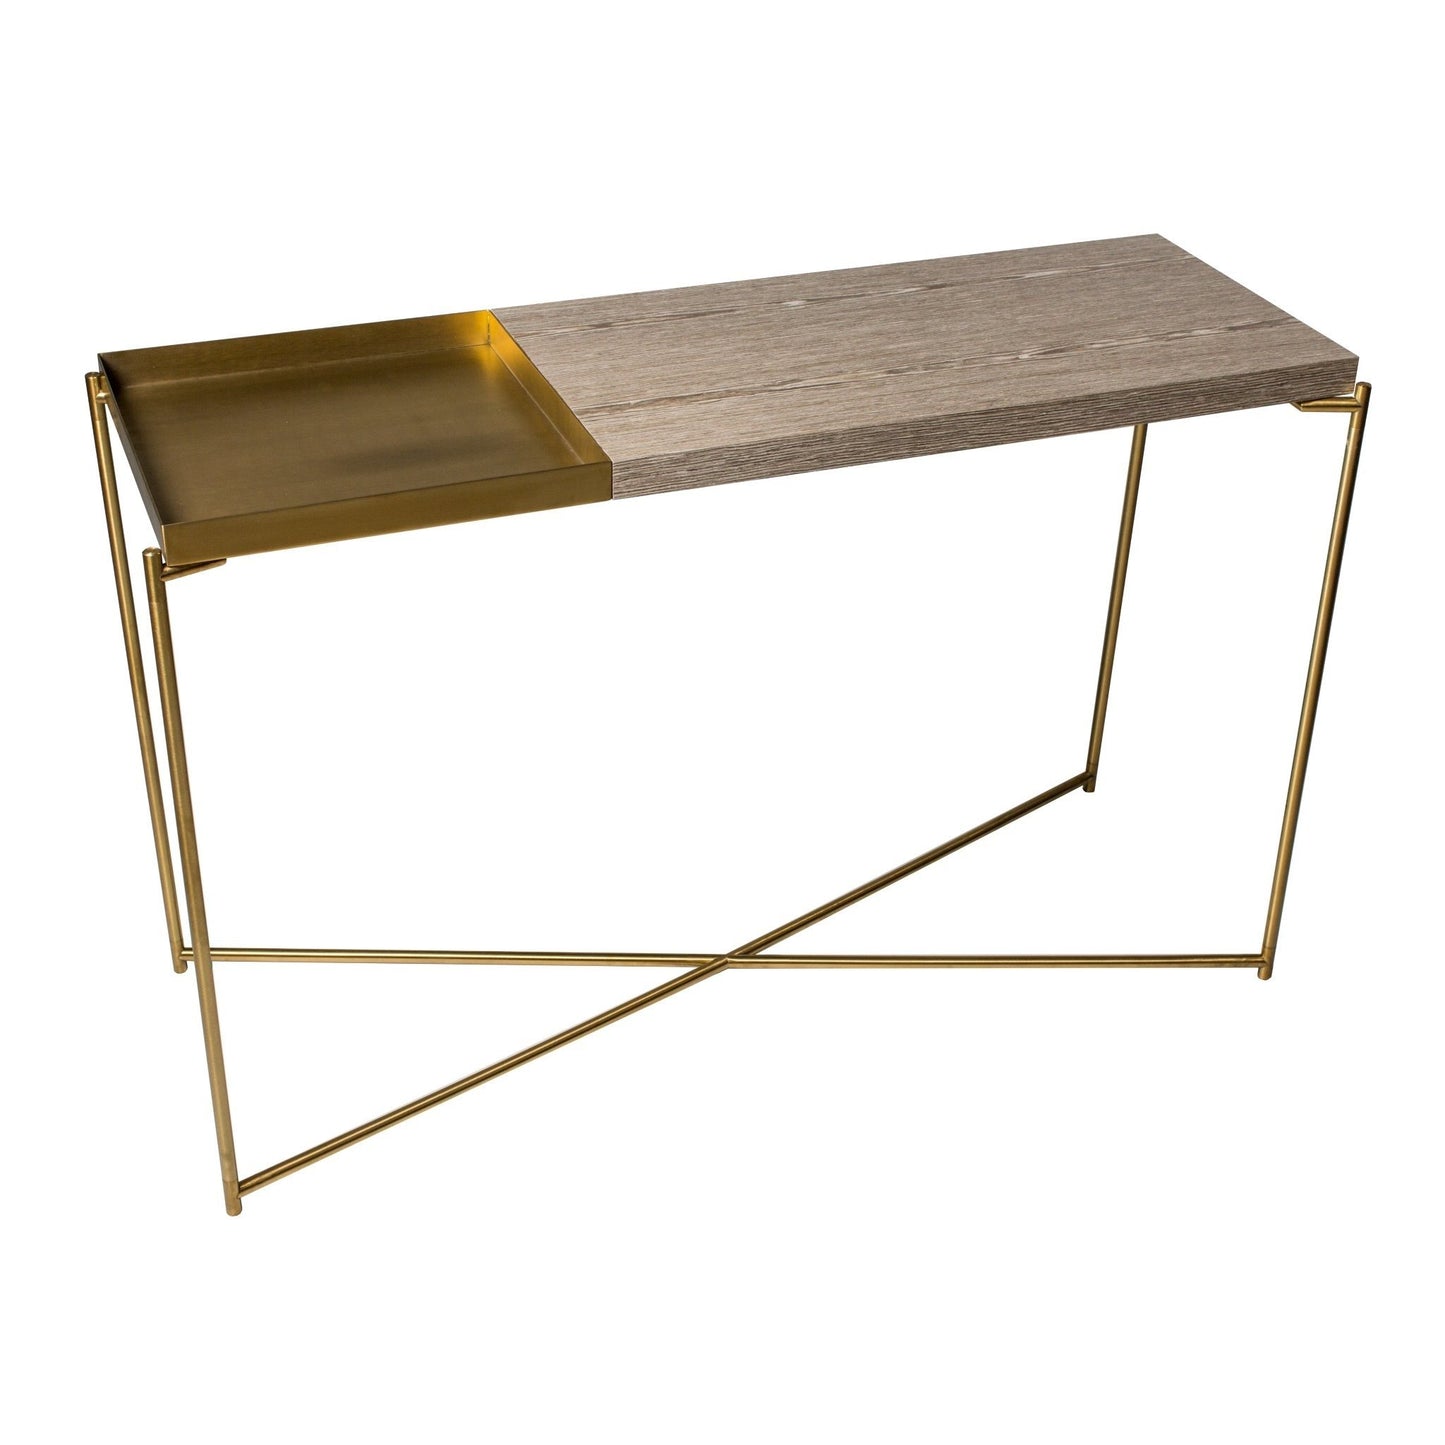 Iris Large Console Table - Large Weathered Oak Top & Small Brass Tray, Brass Frame